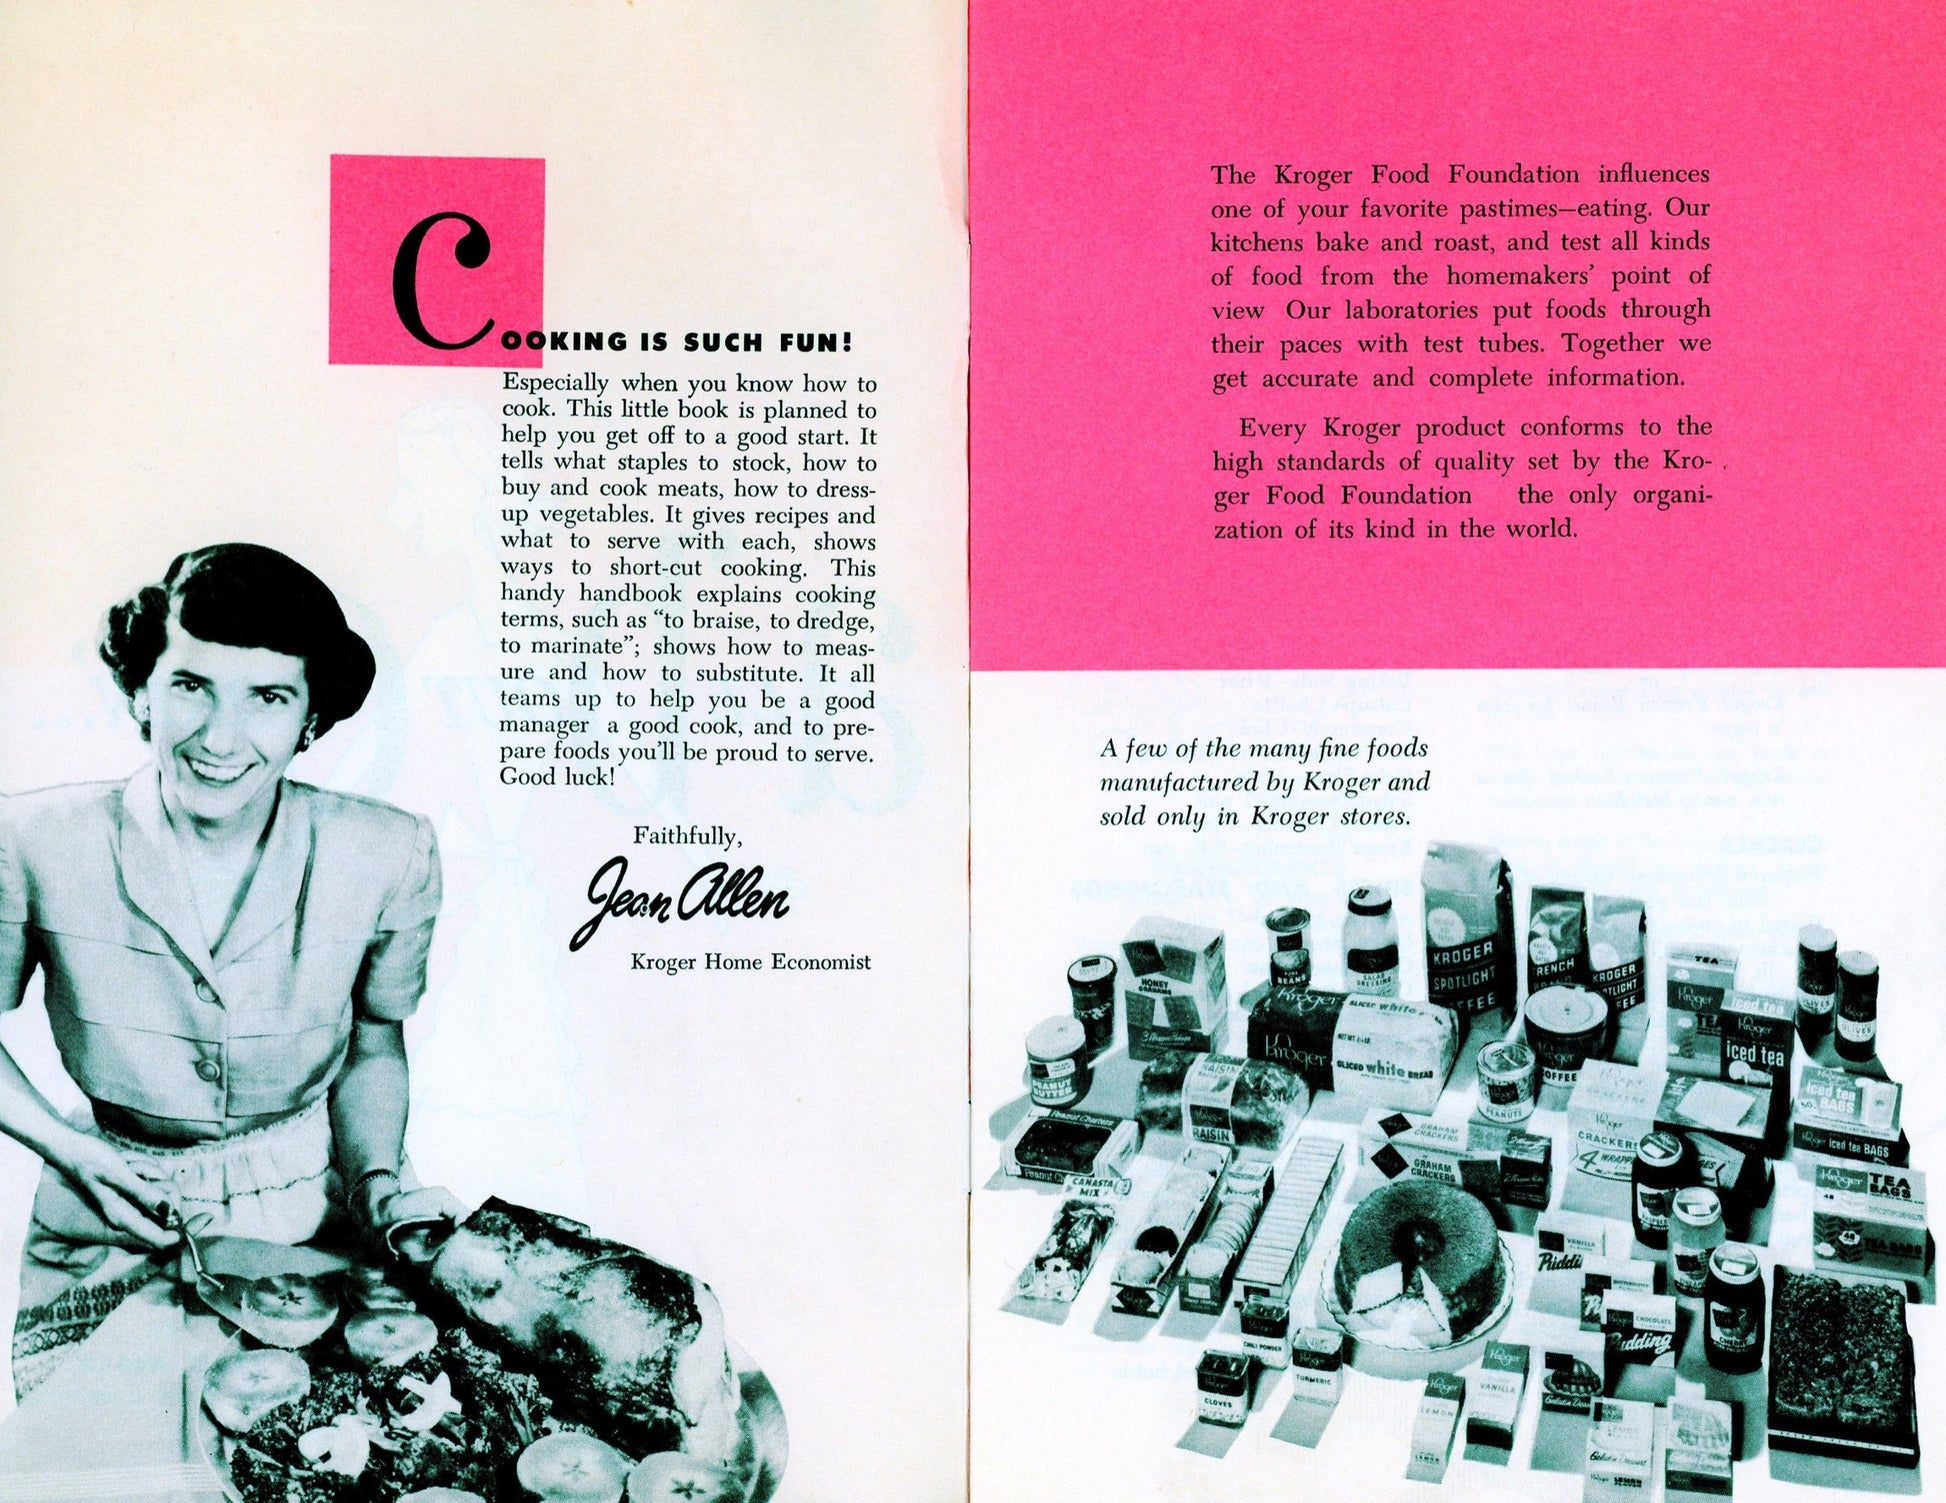 ALL 'BOUT COOKIN'... Recipe Book by Jean Allen Published by The Kroger Foundation Circa 1950-1960